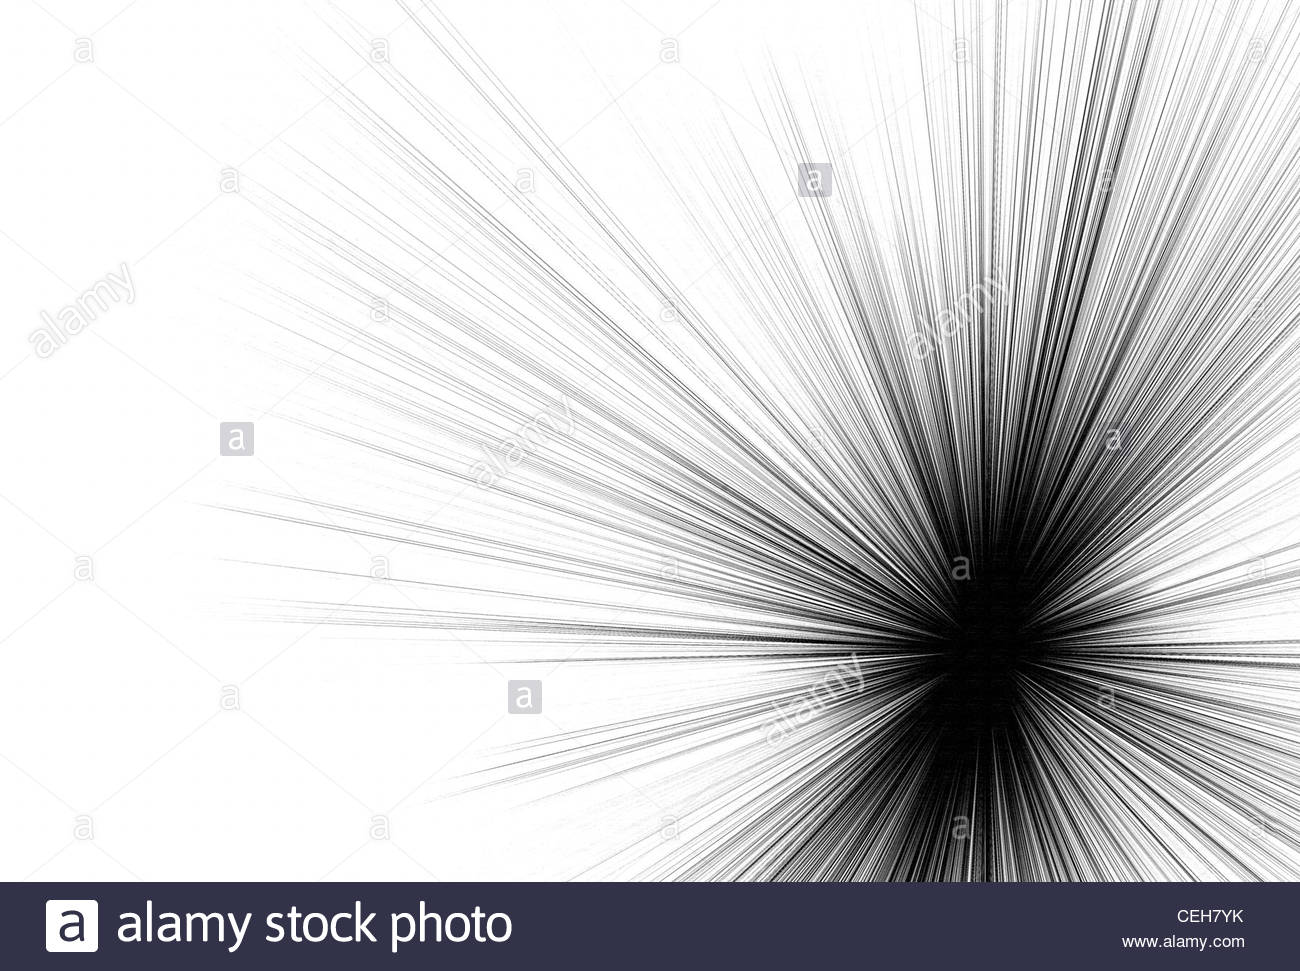 Beautiful Abstract Black And White Background Stock Photo